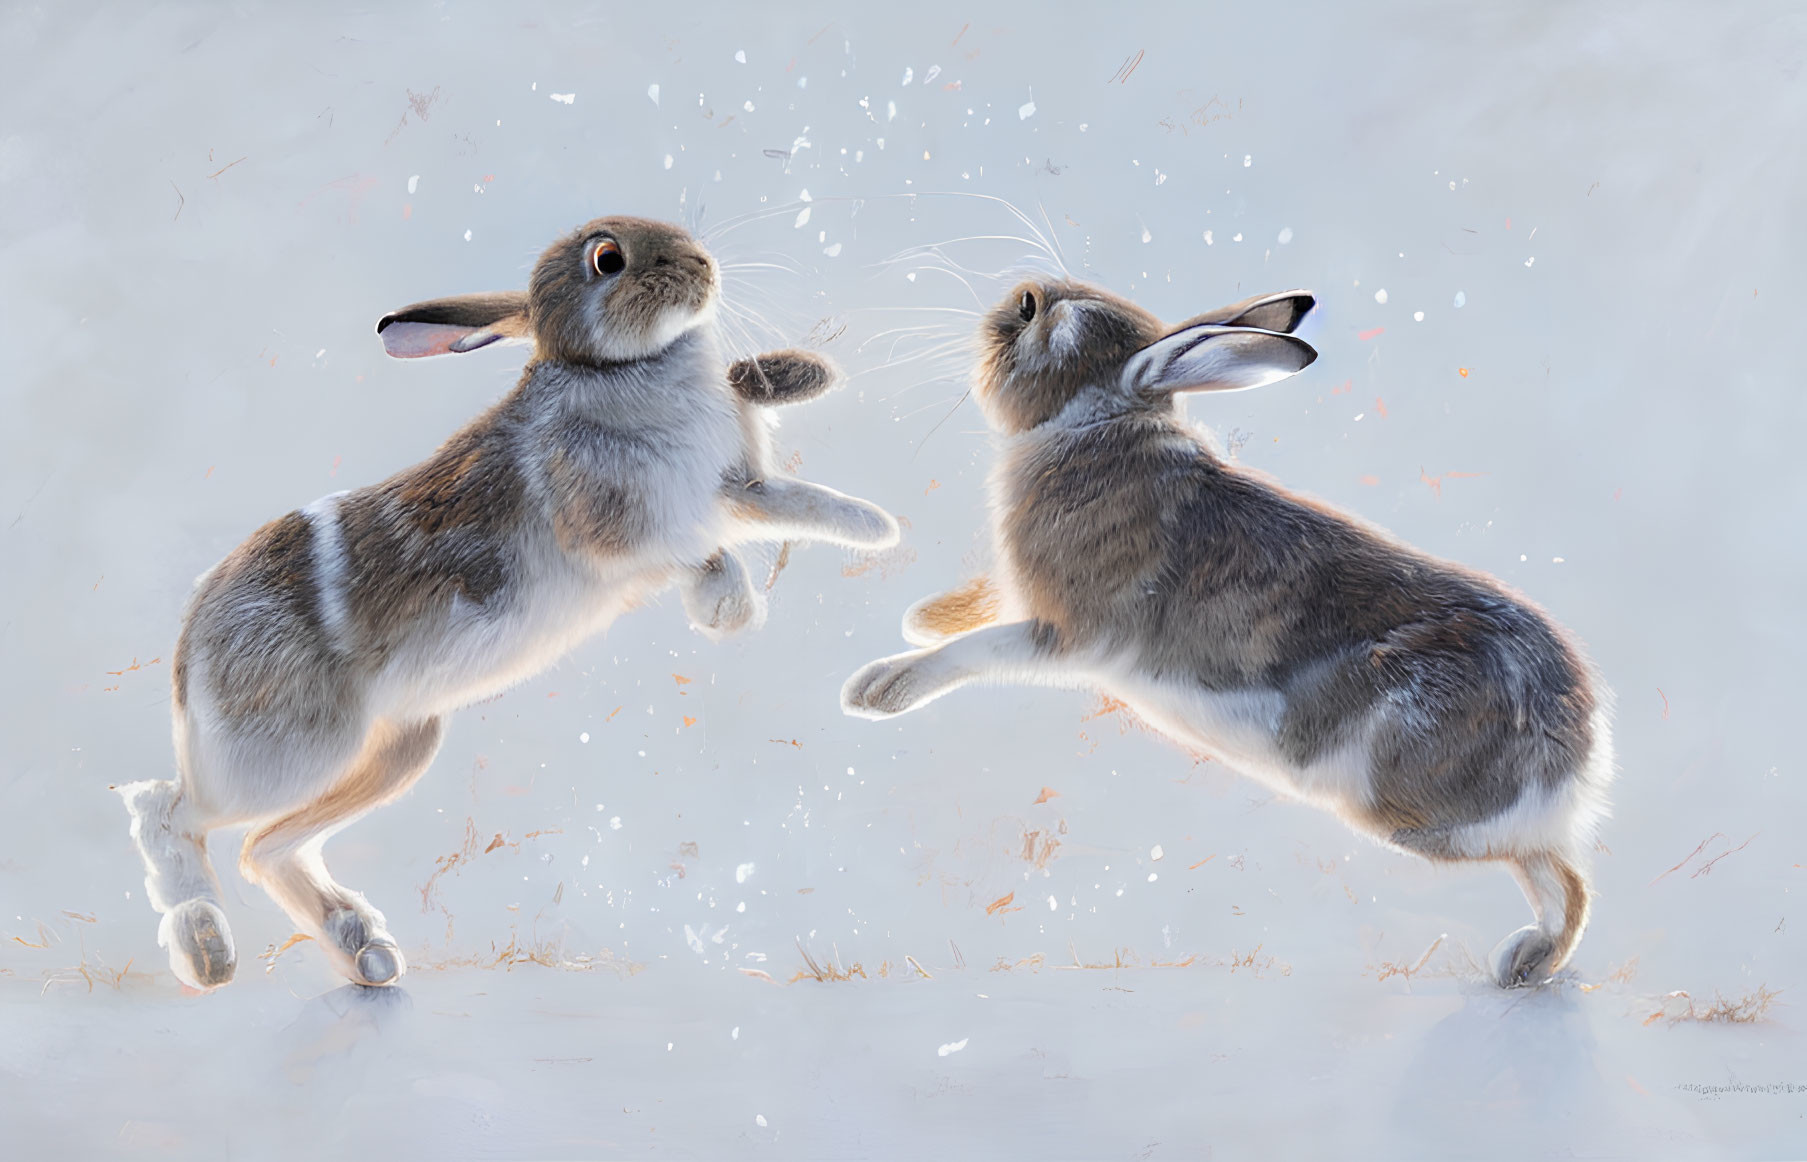 Two leaping rabbits in snowy scene with scattered snowflakes.